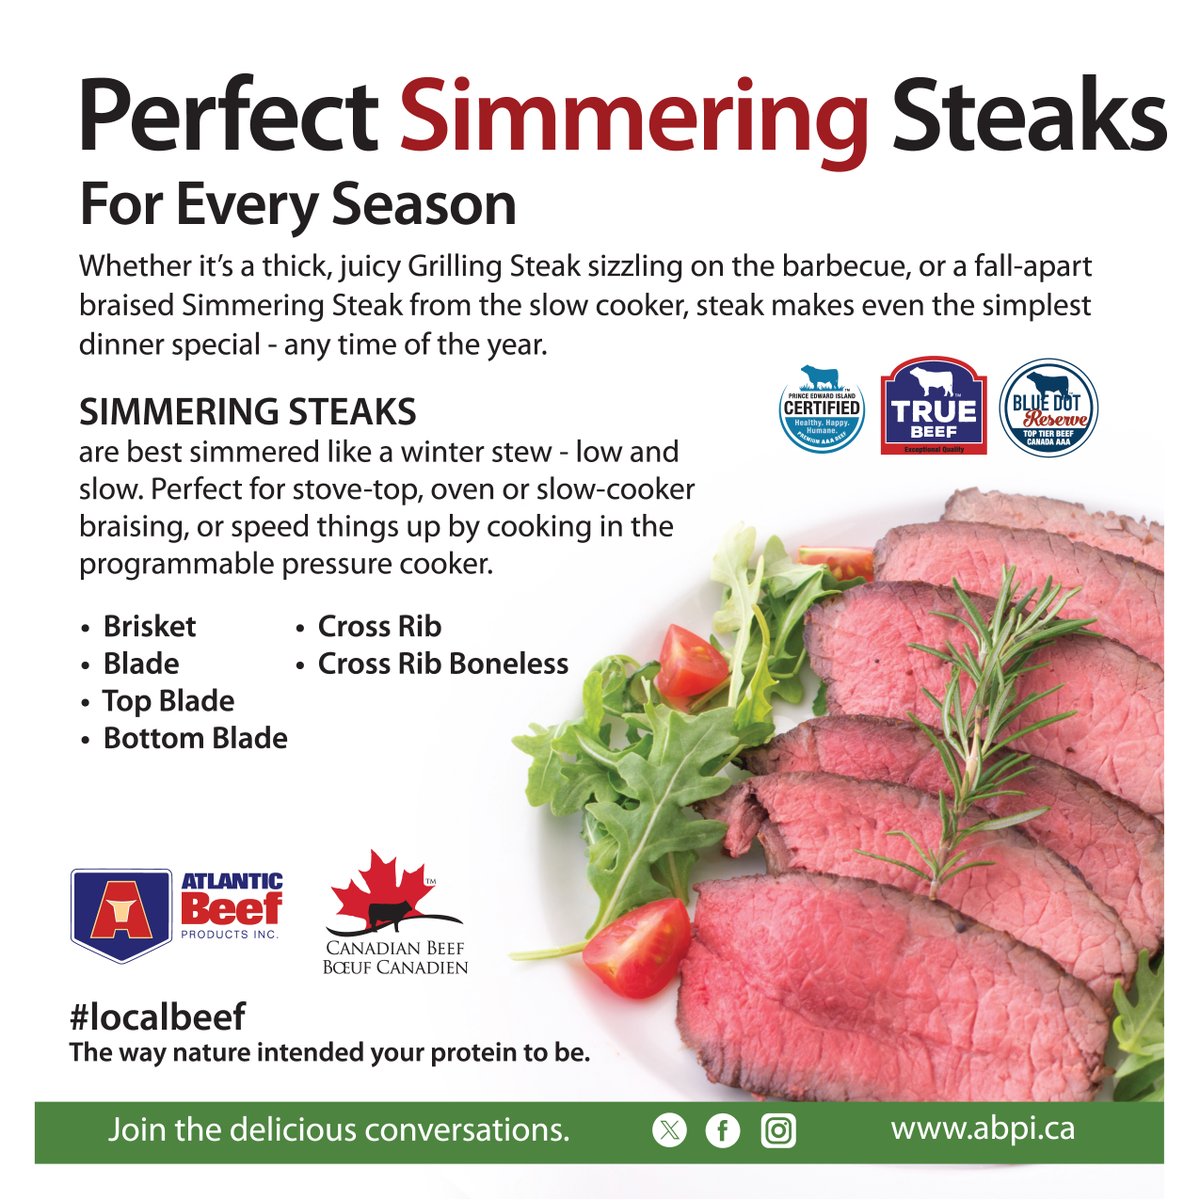 Steak makes even the simplest dinner special - any time of the year. #LocalBeef for Every Season. abpi.ca #PEIBeef #IslandBeef #SustainableBeef #SafeBeef #Protein #LocalBeef #HealthyBeef #BrainHealth #PEIBeef #IslandBeef #SustainableBeef #SafeBeef #Protein